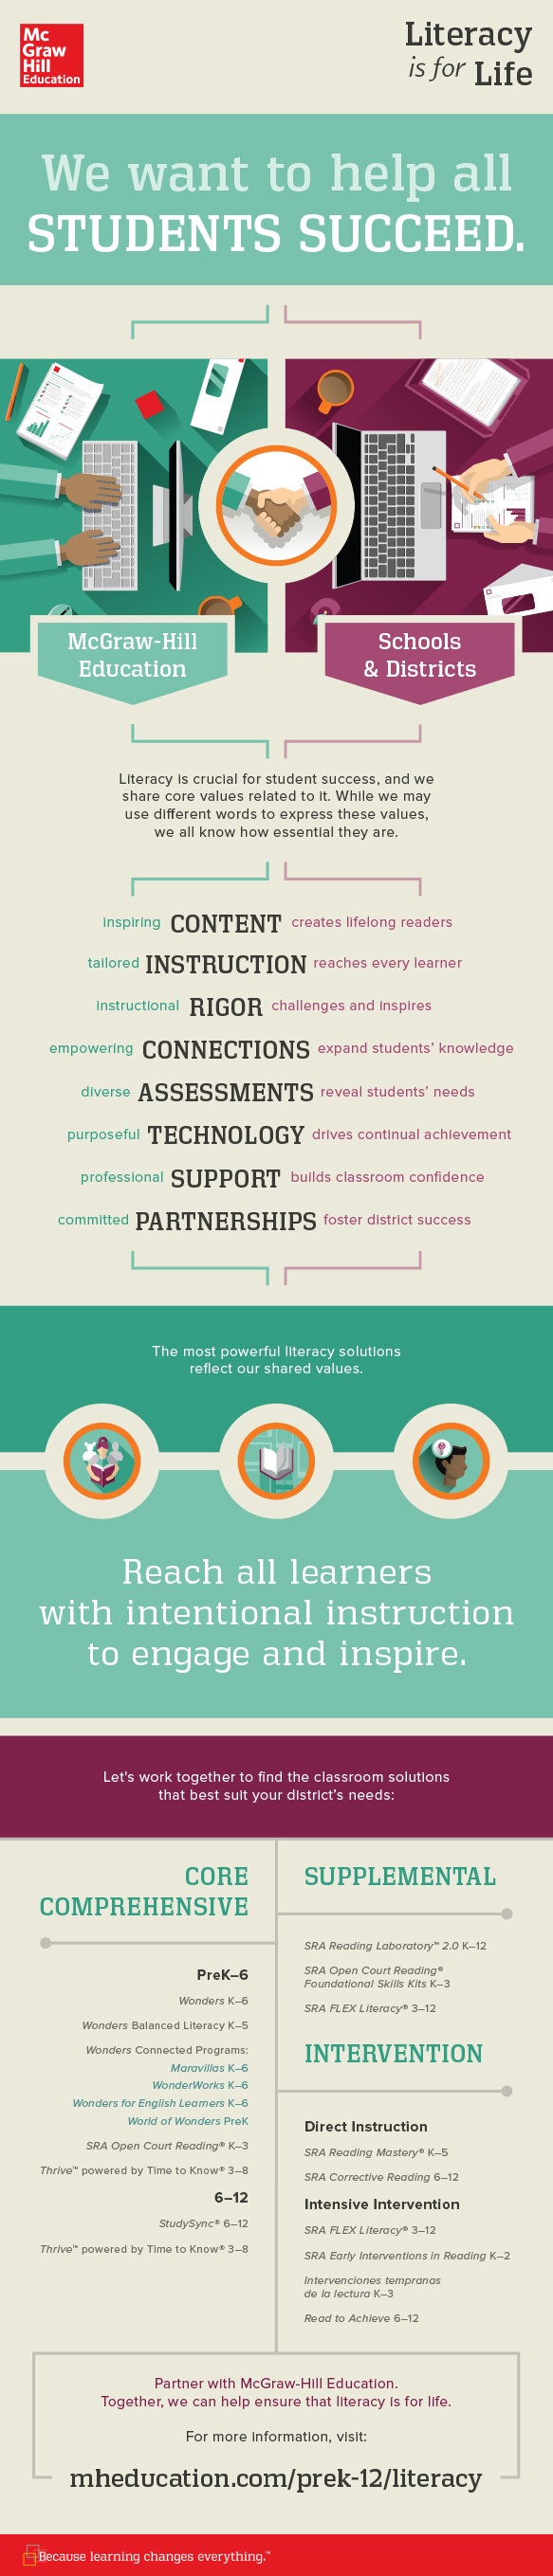 Literacy is for Life: Helping All Students Succeed Infographic